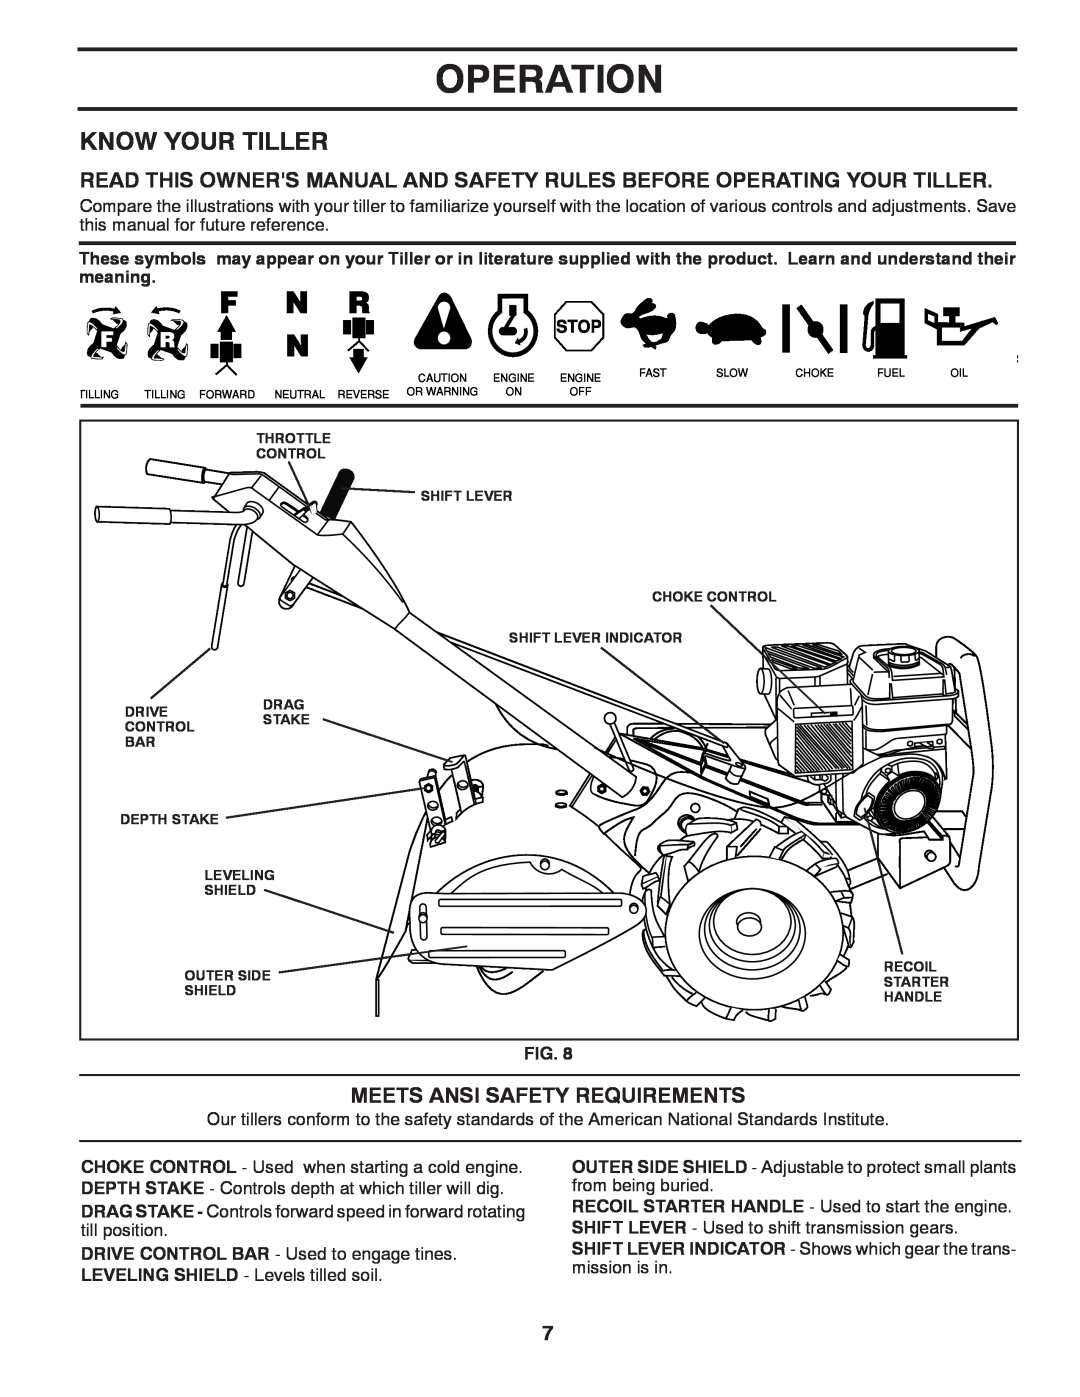 Poulan DRT875 manual Operation, Know Your Tiller, Meets Ansi Safety Requirements, Fig 